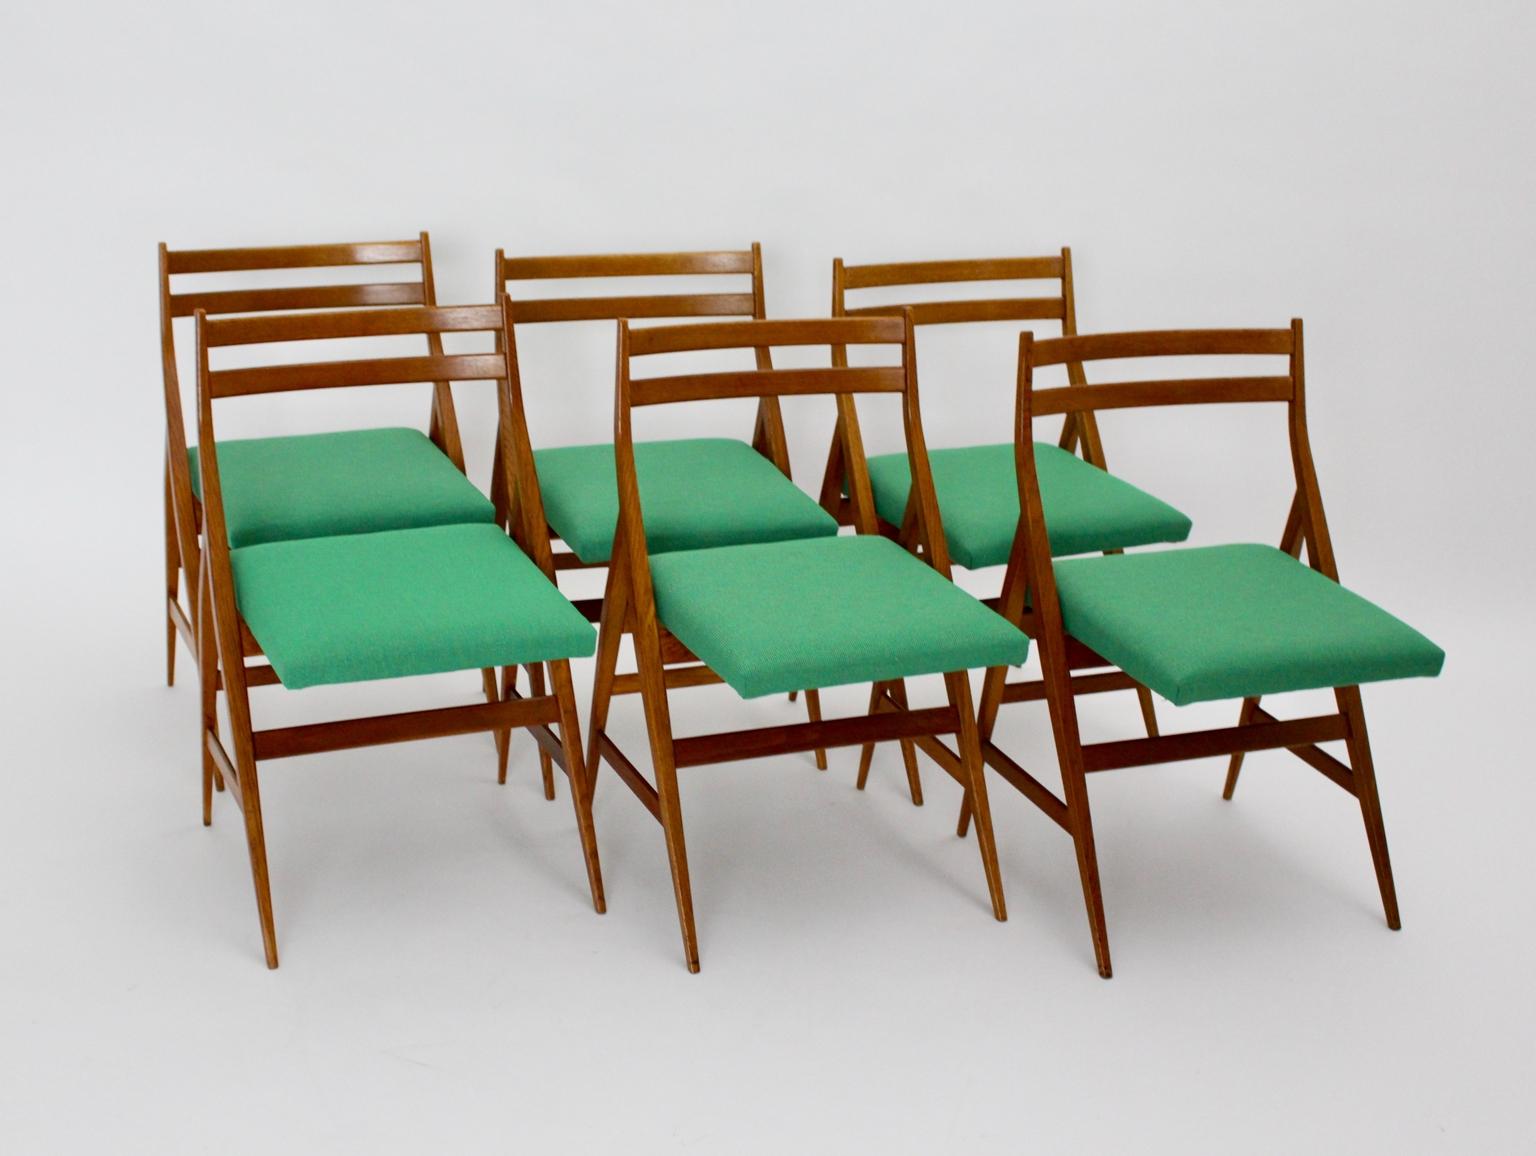 20th Century Mid-Century Modern Vintage Wood Dining Chairs Piero Bottoni Attributed, Italy For Sale